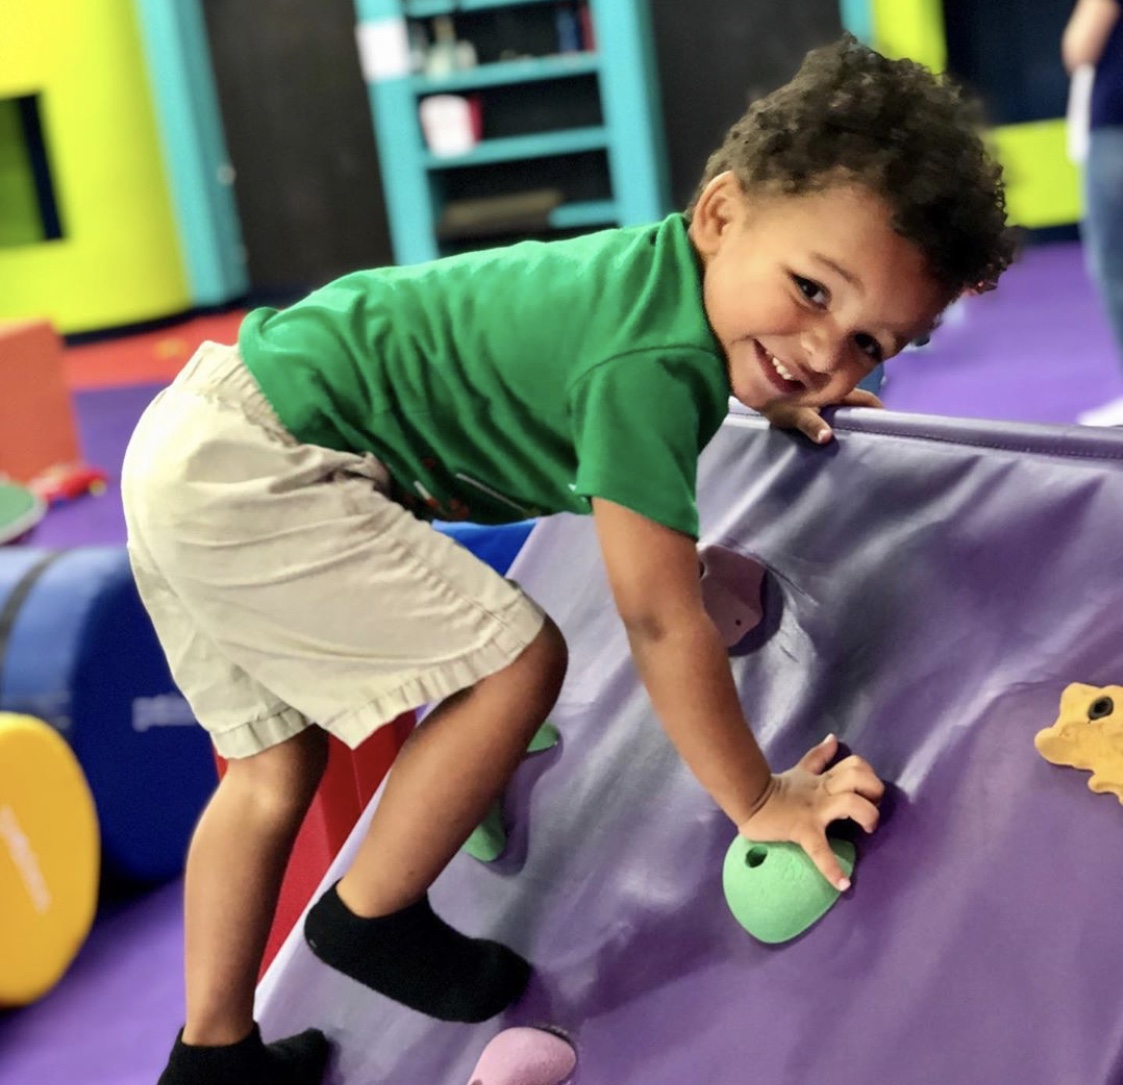 This sweet young boy loves our fitness classes at Romp n' Roll.